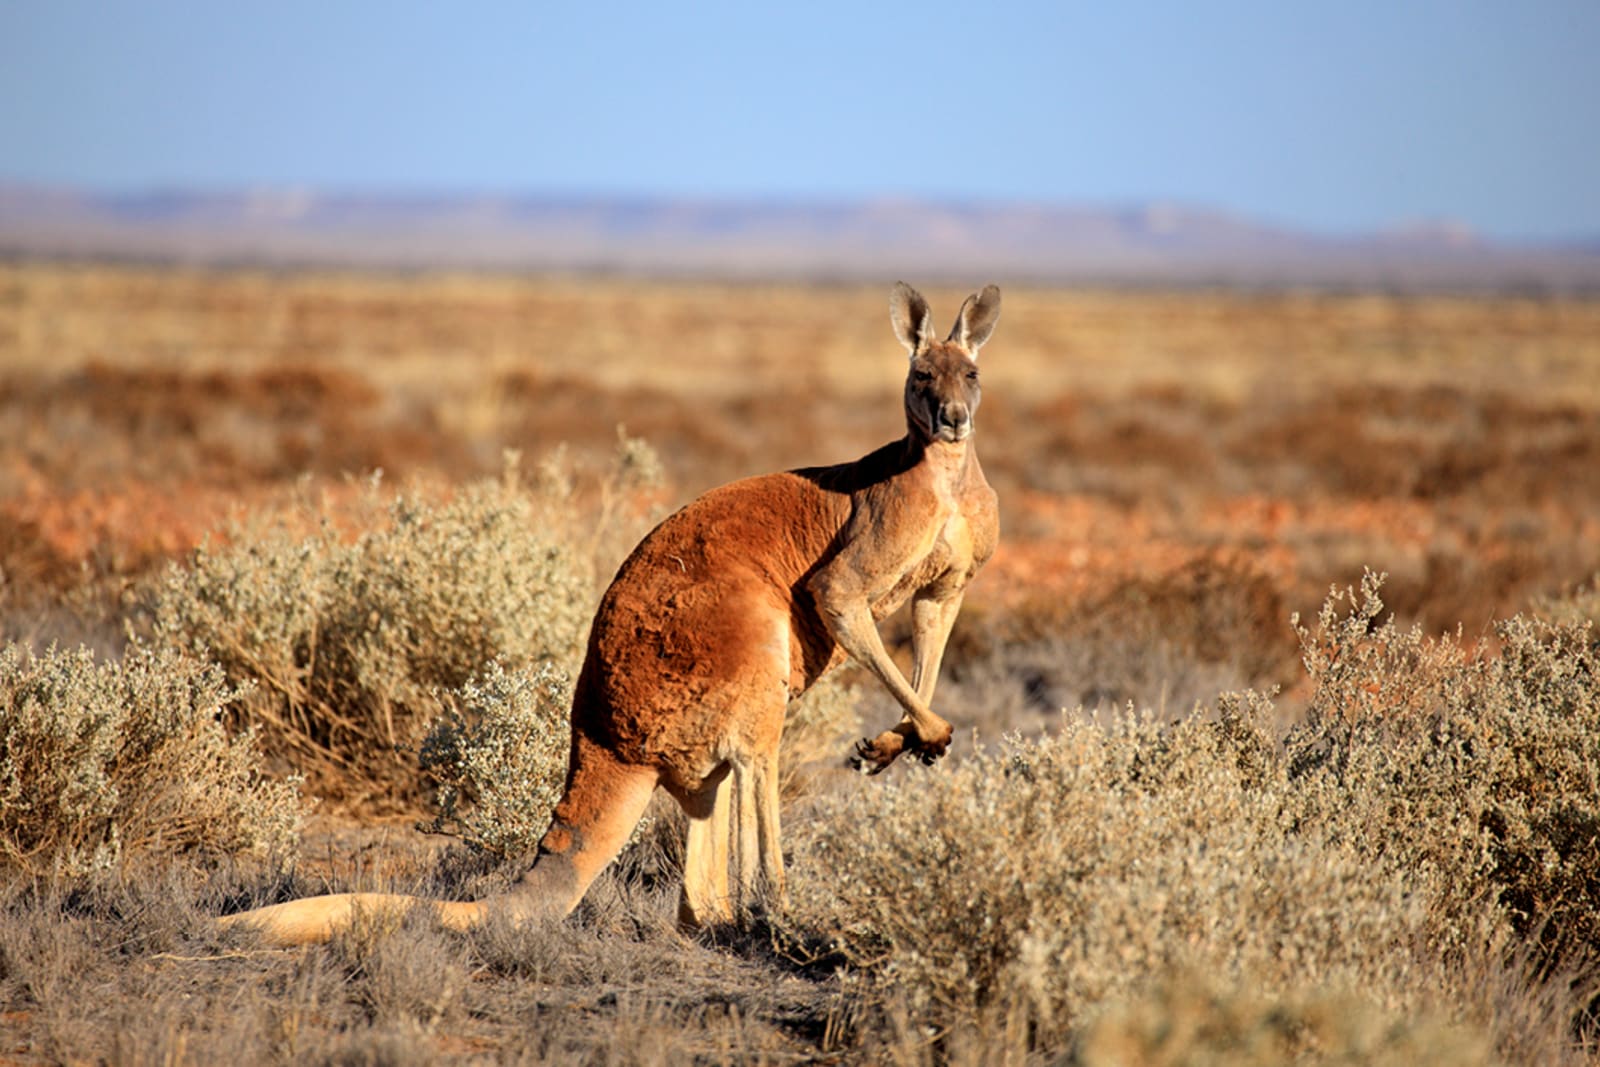 A red kangaroo in the Australian outback